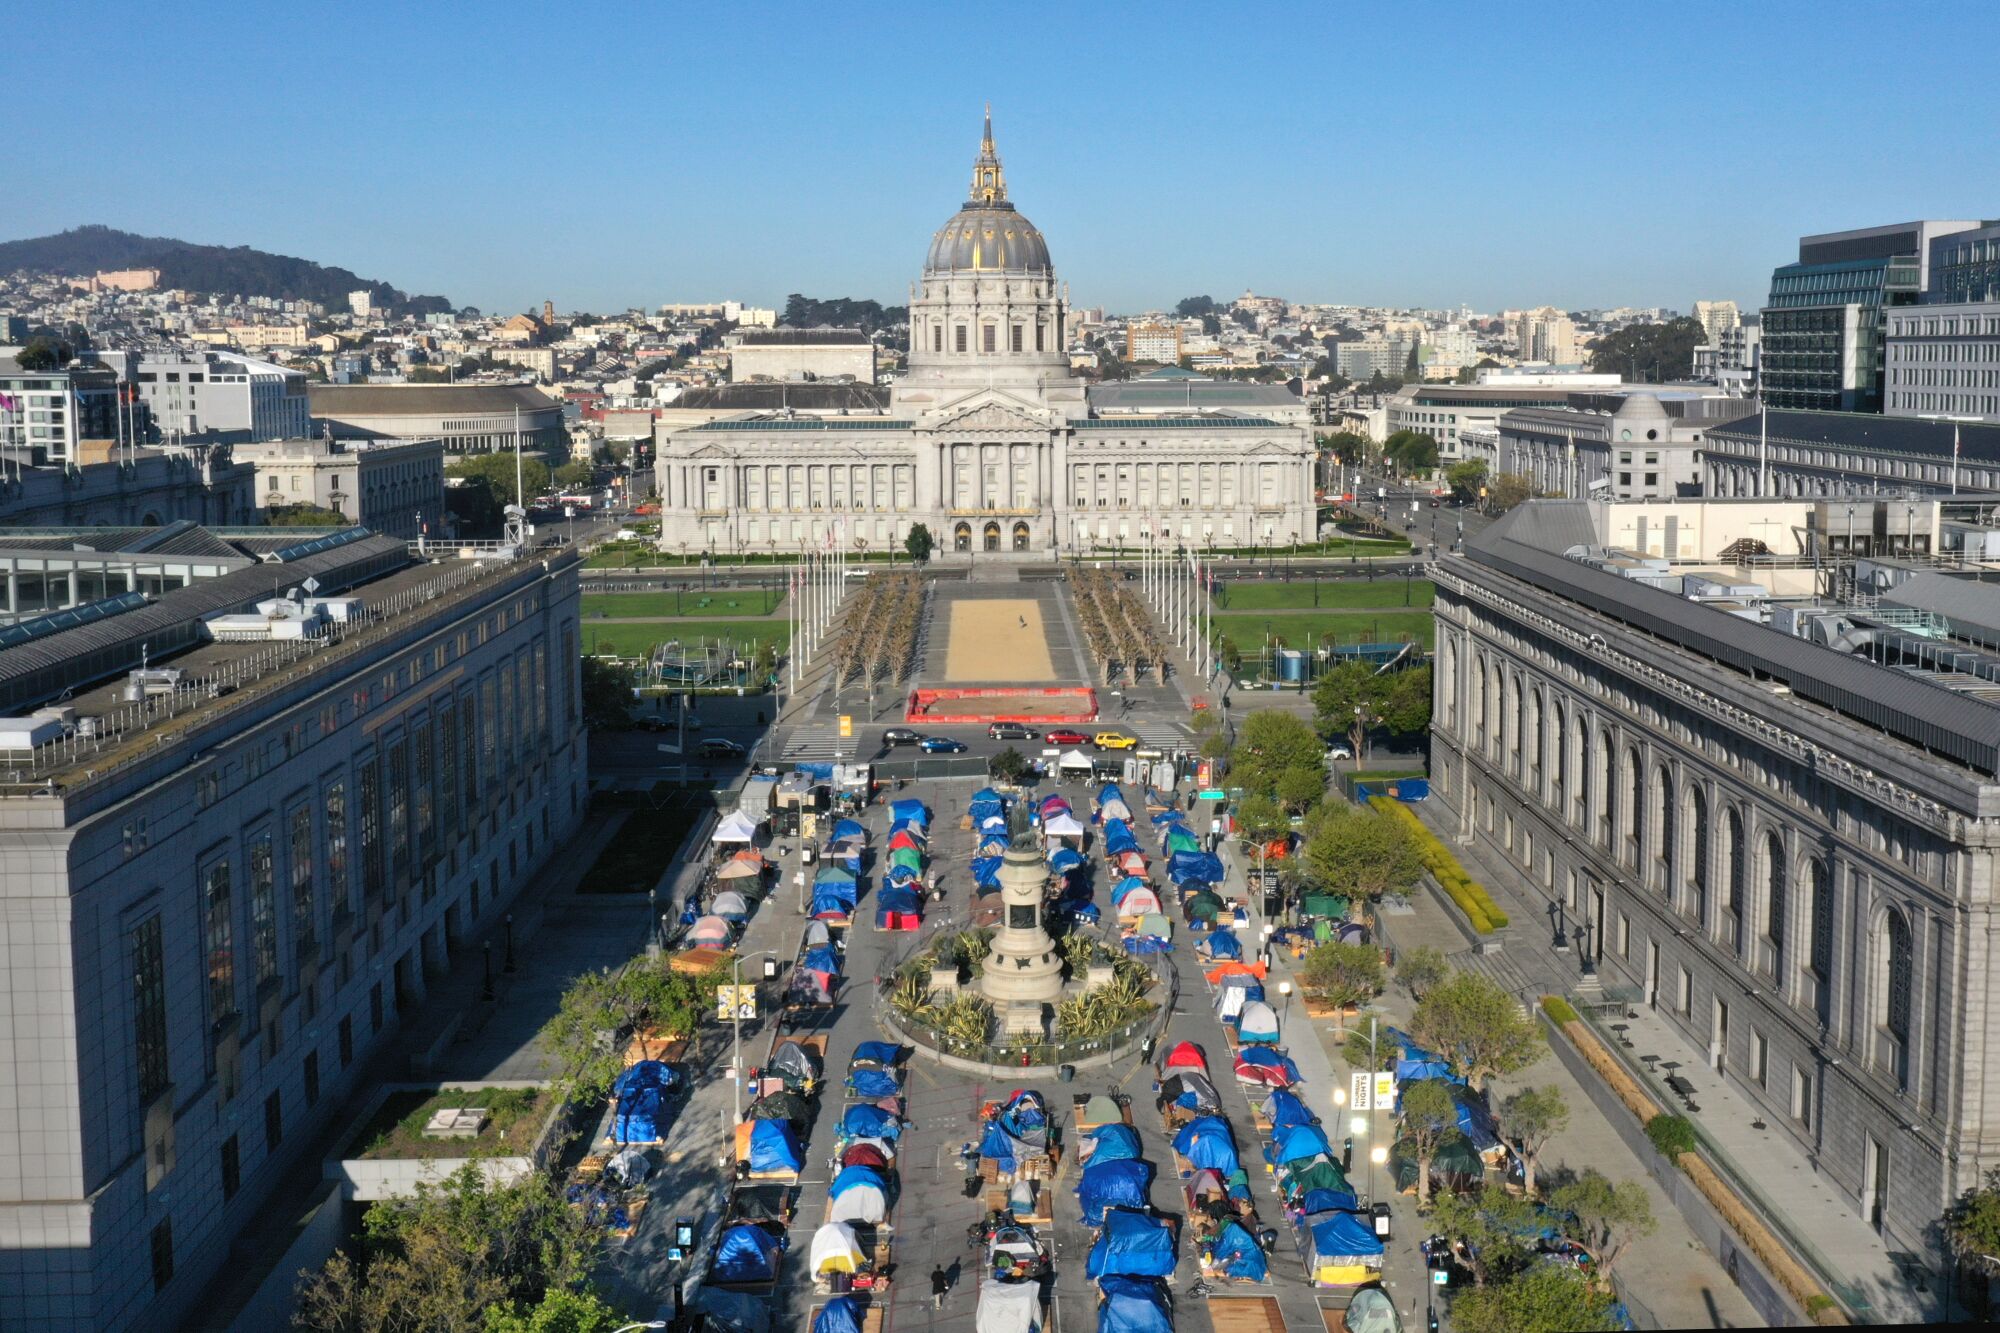 Tents in rows at San Francisco's Civic Center.